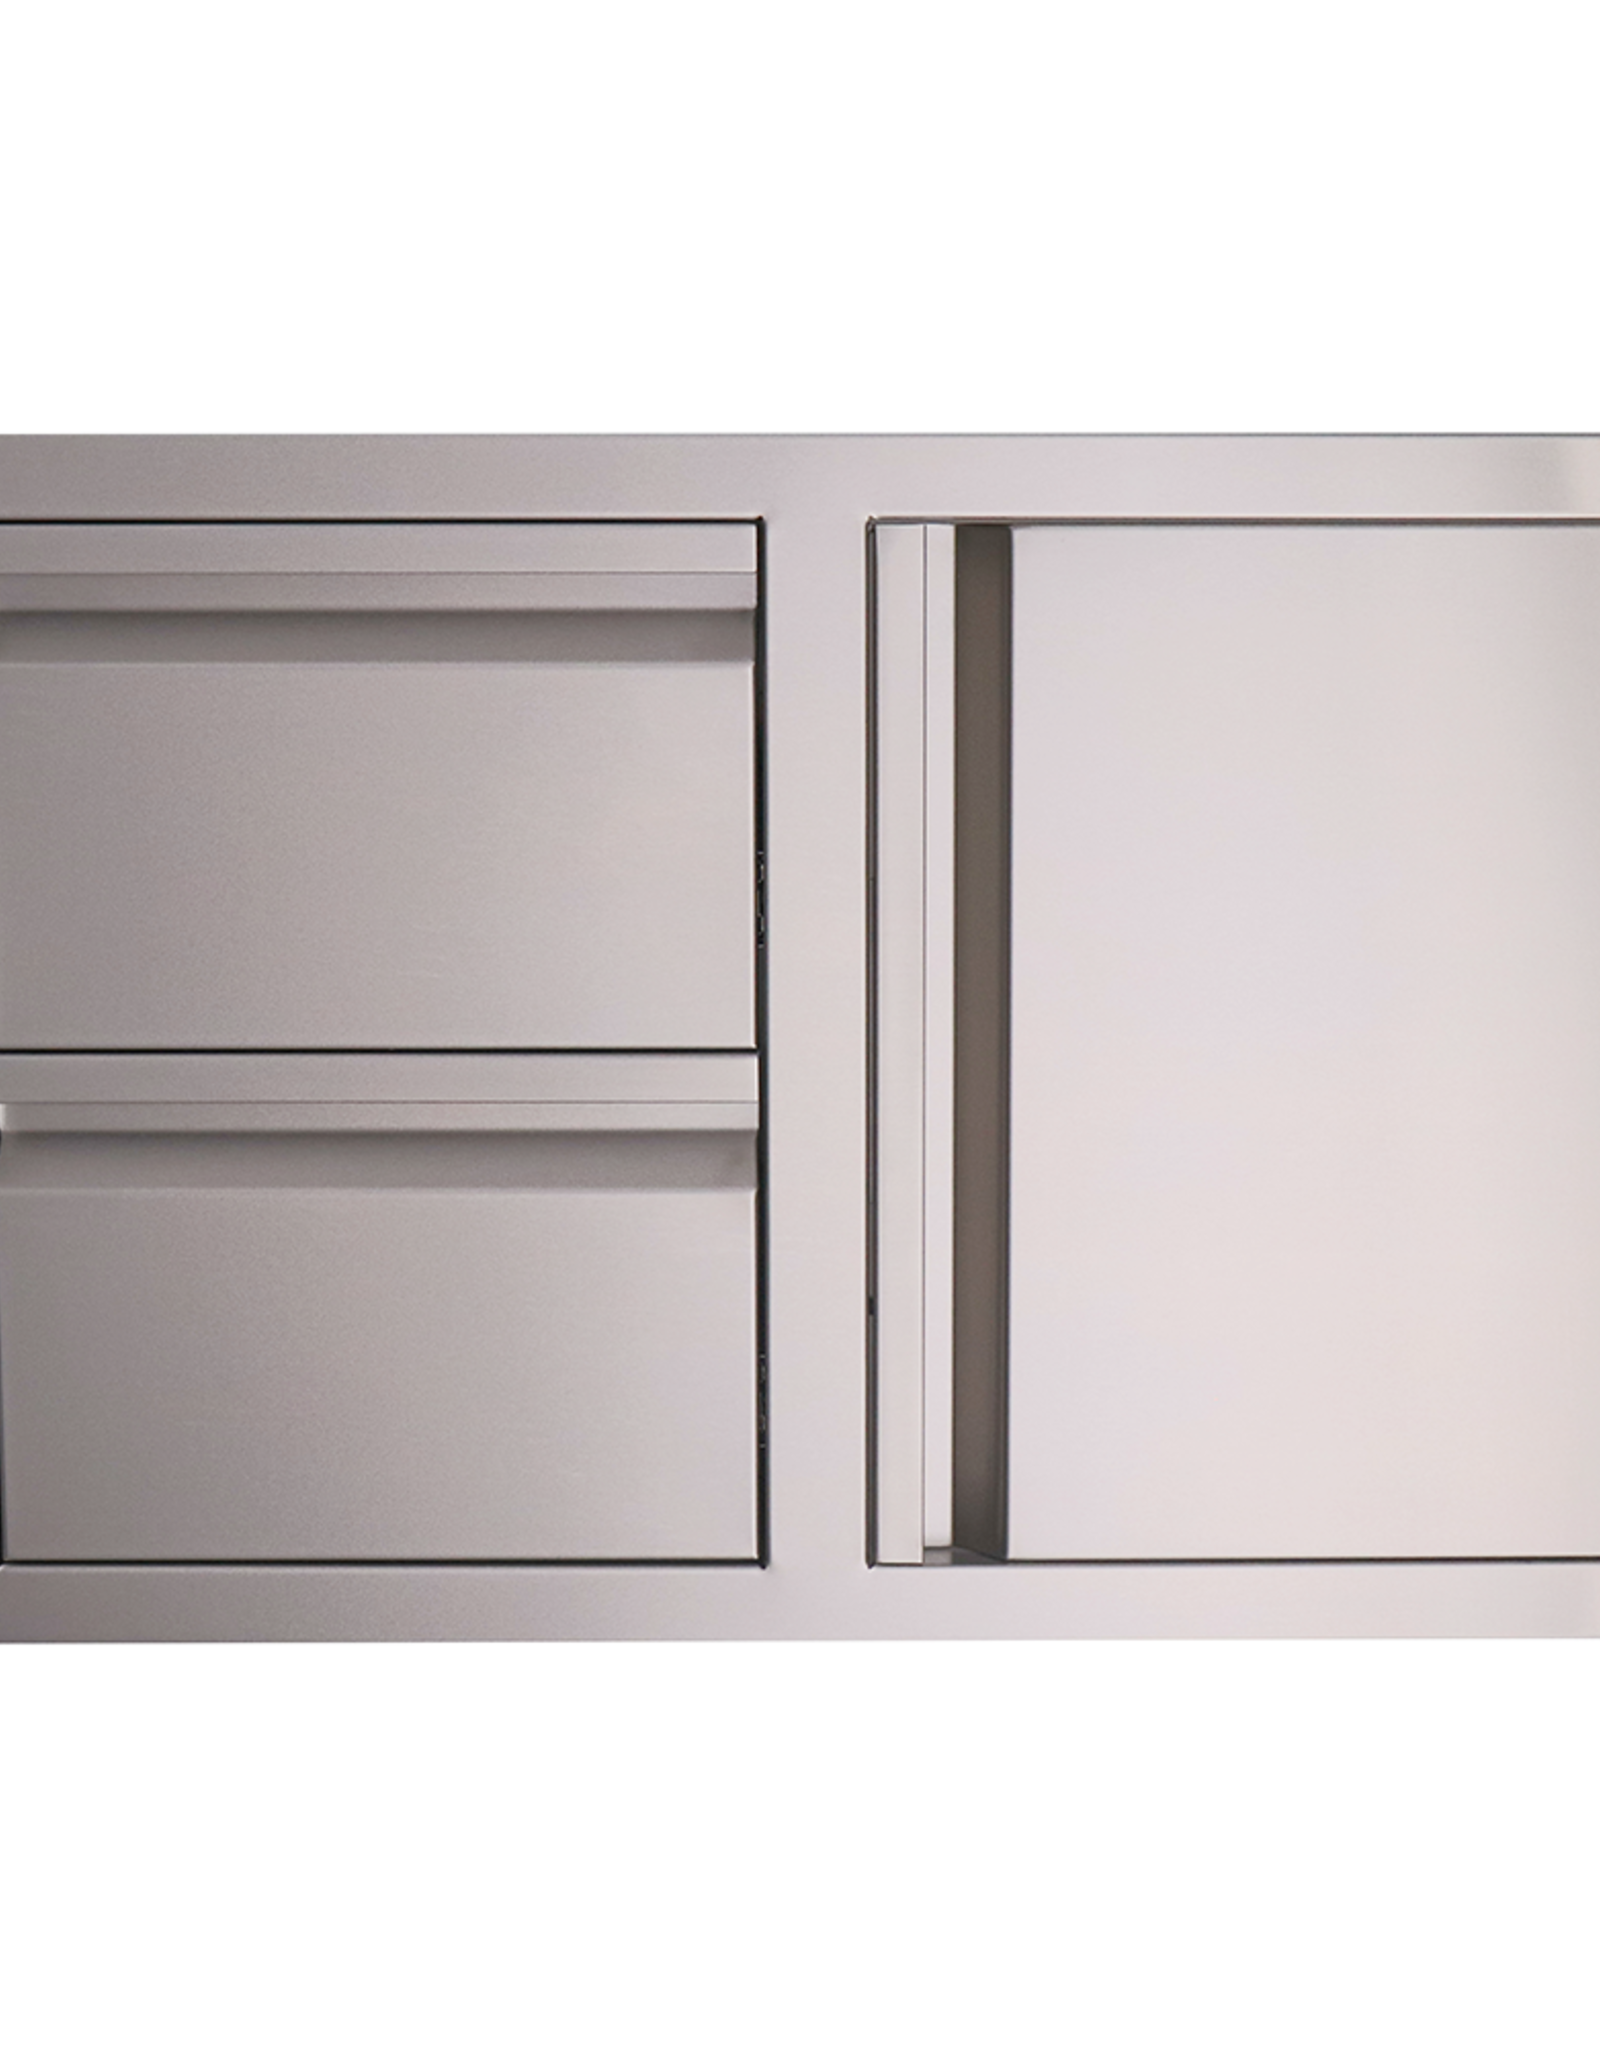 Renaissance Cooking Systems Renaissance Cooking Systems The Valiant Series Double Drawer w/ Door Combo - VDC1